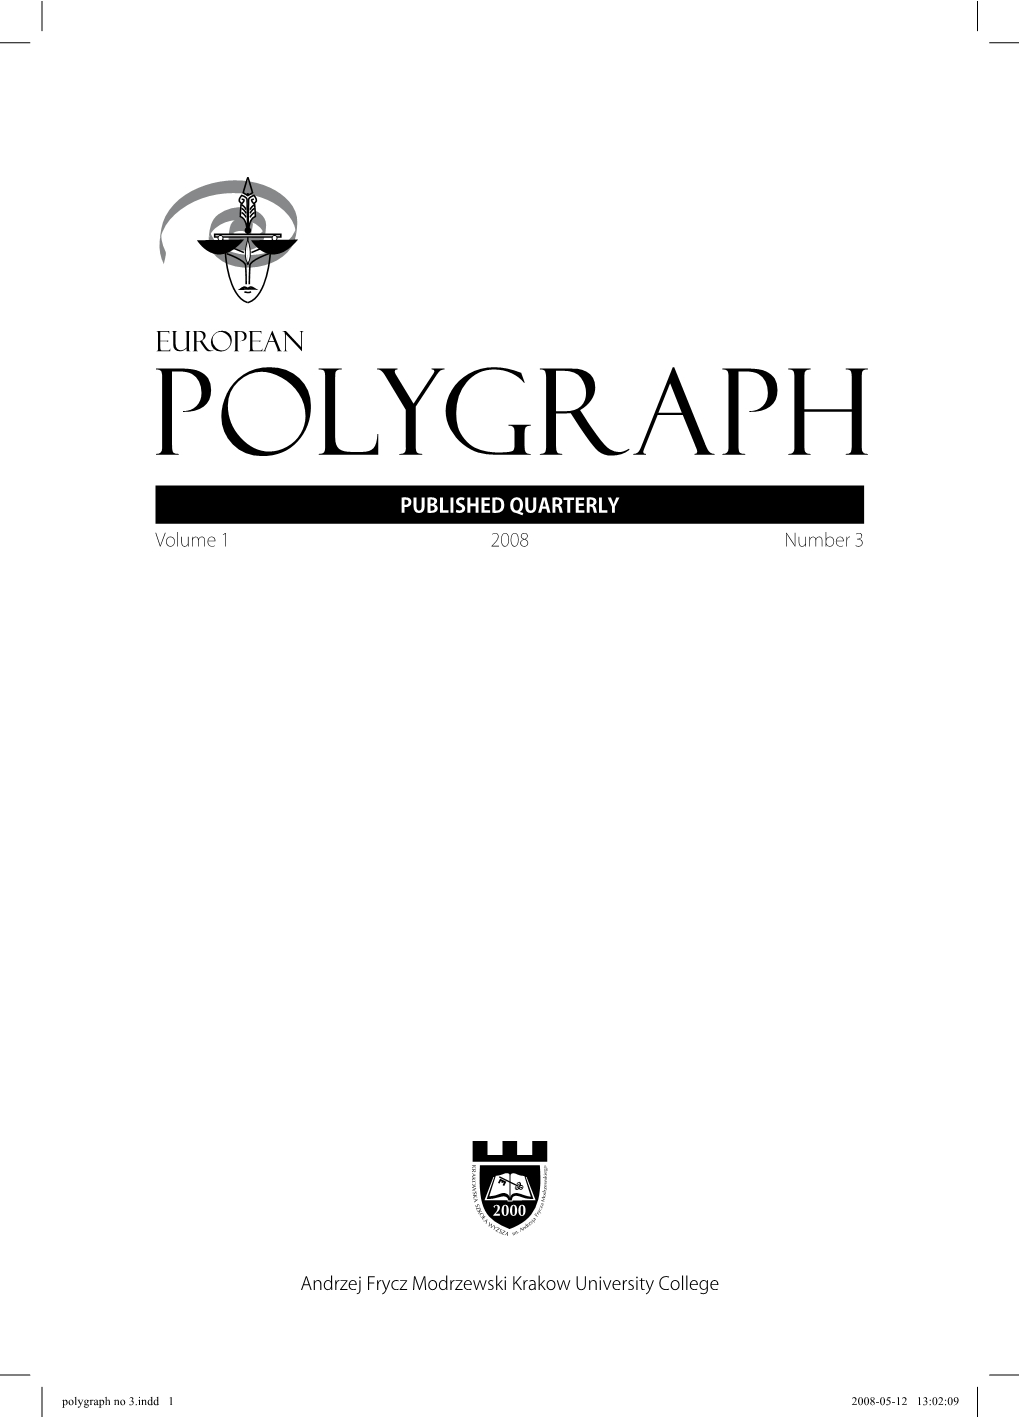 Alibi Testing Potential in Polygraphic Examination Cover Image